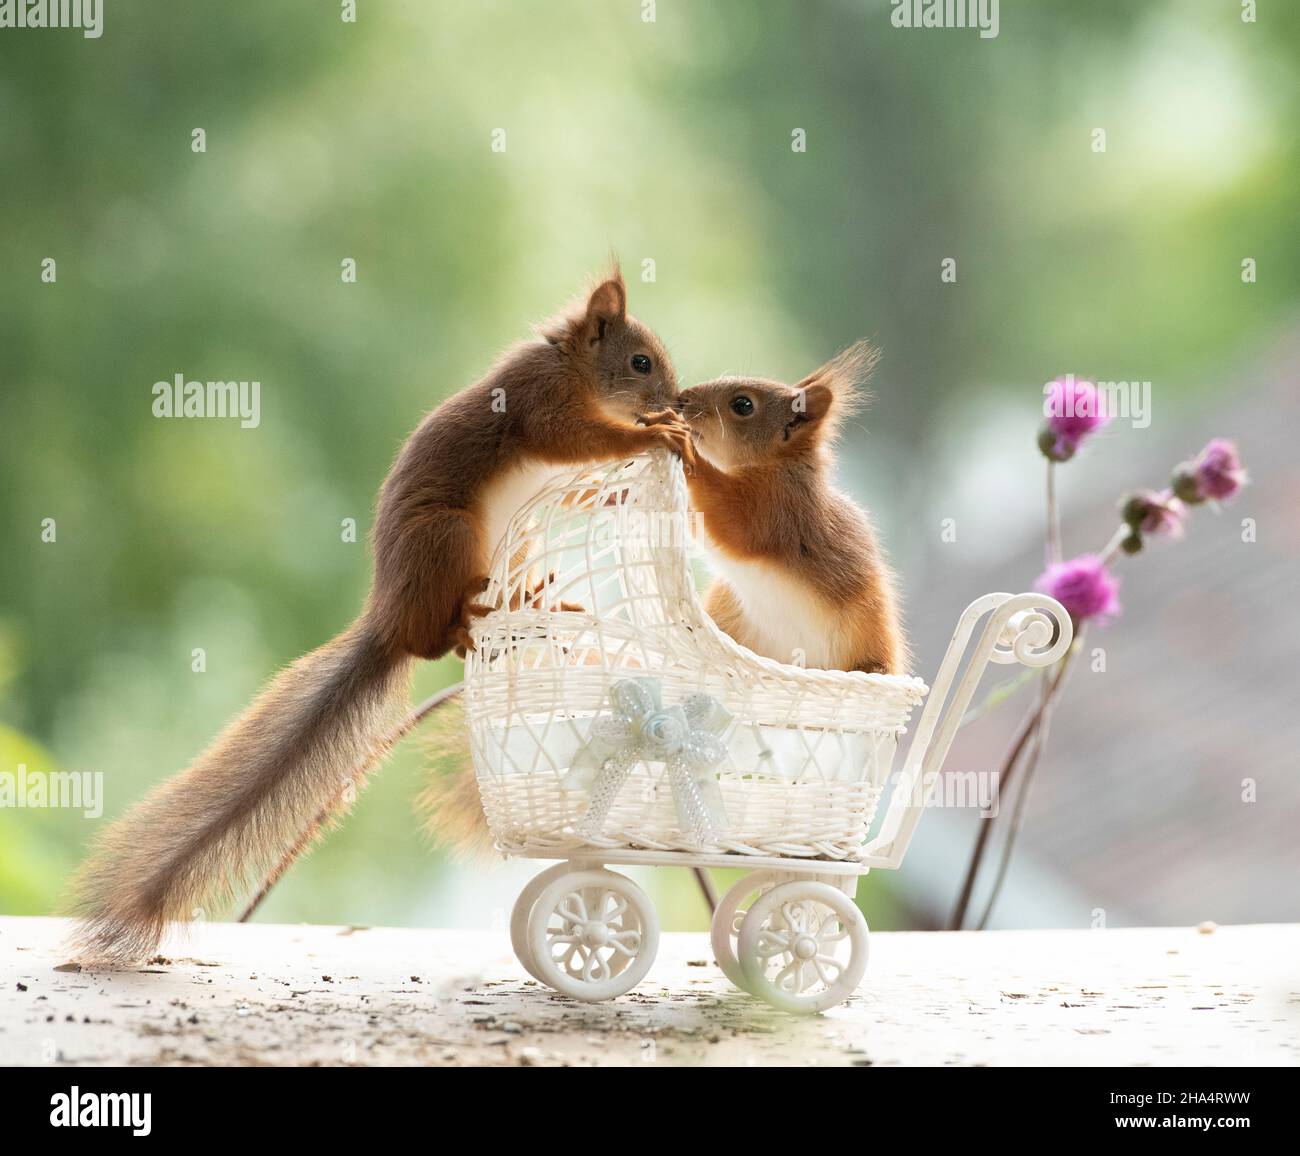 young red squirrels are standing in an stroller Stock Photo